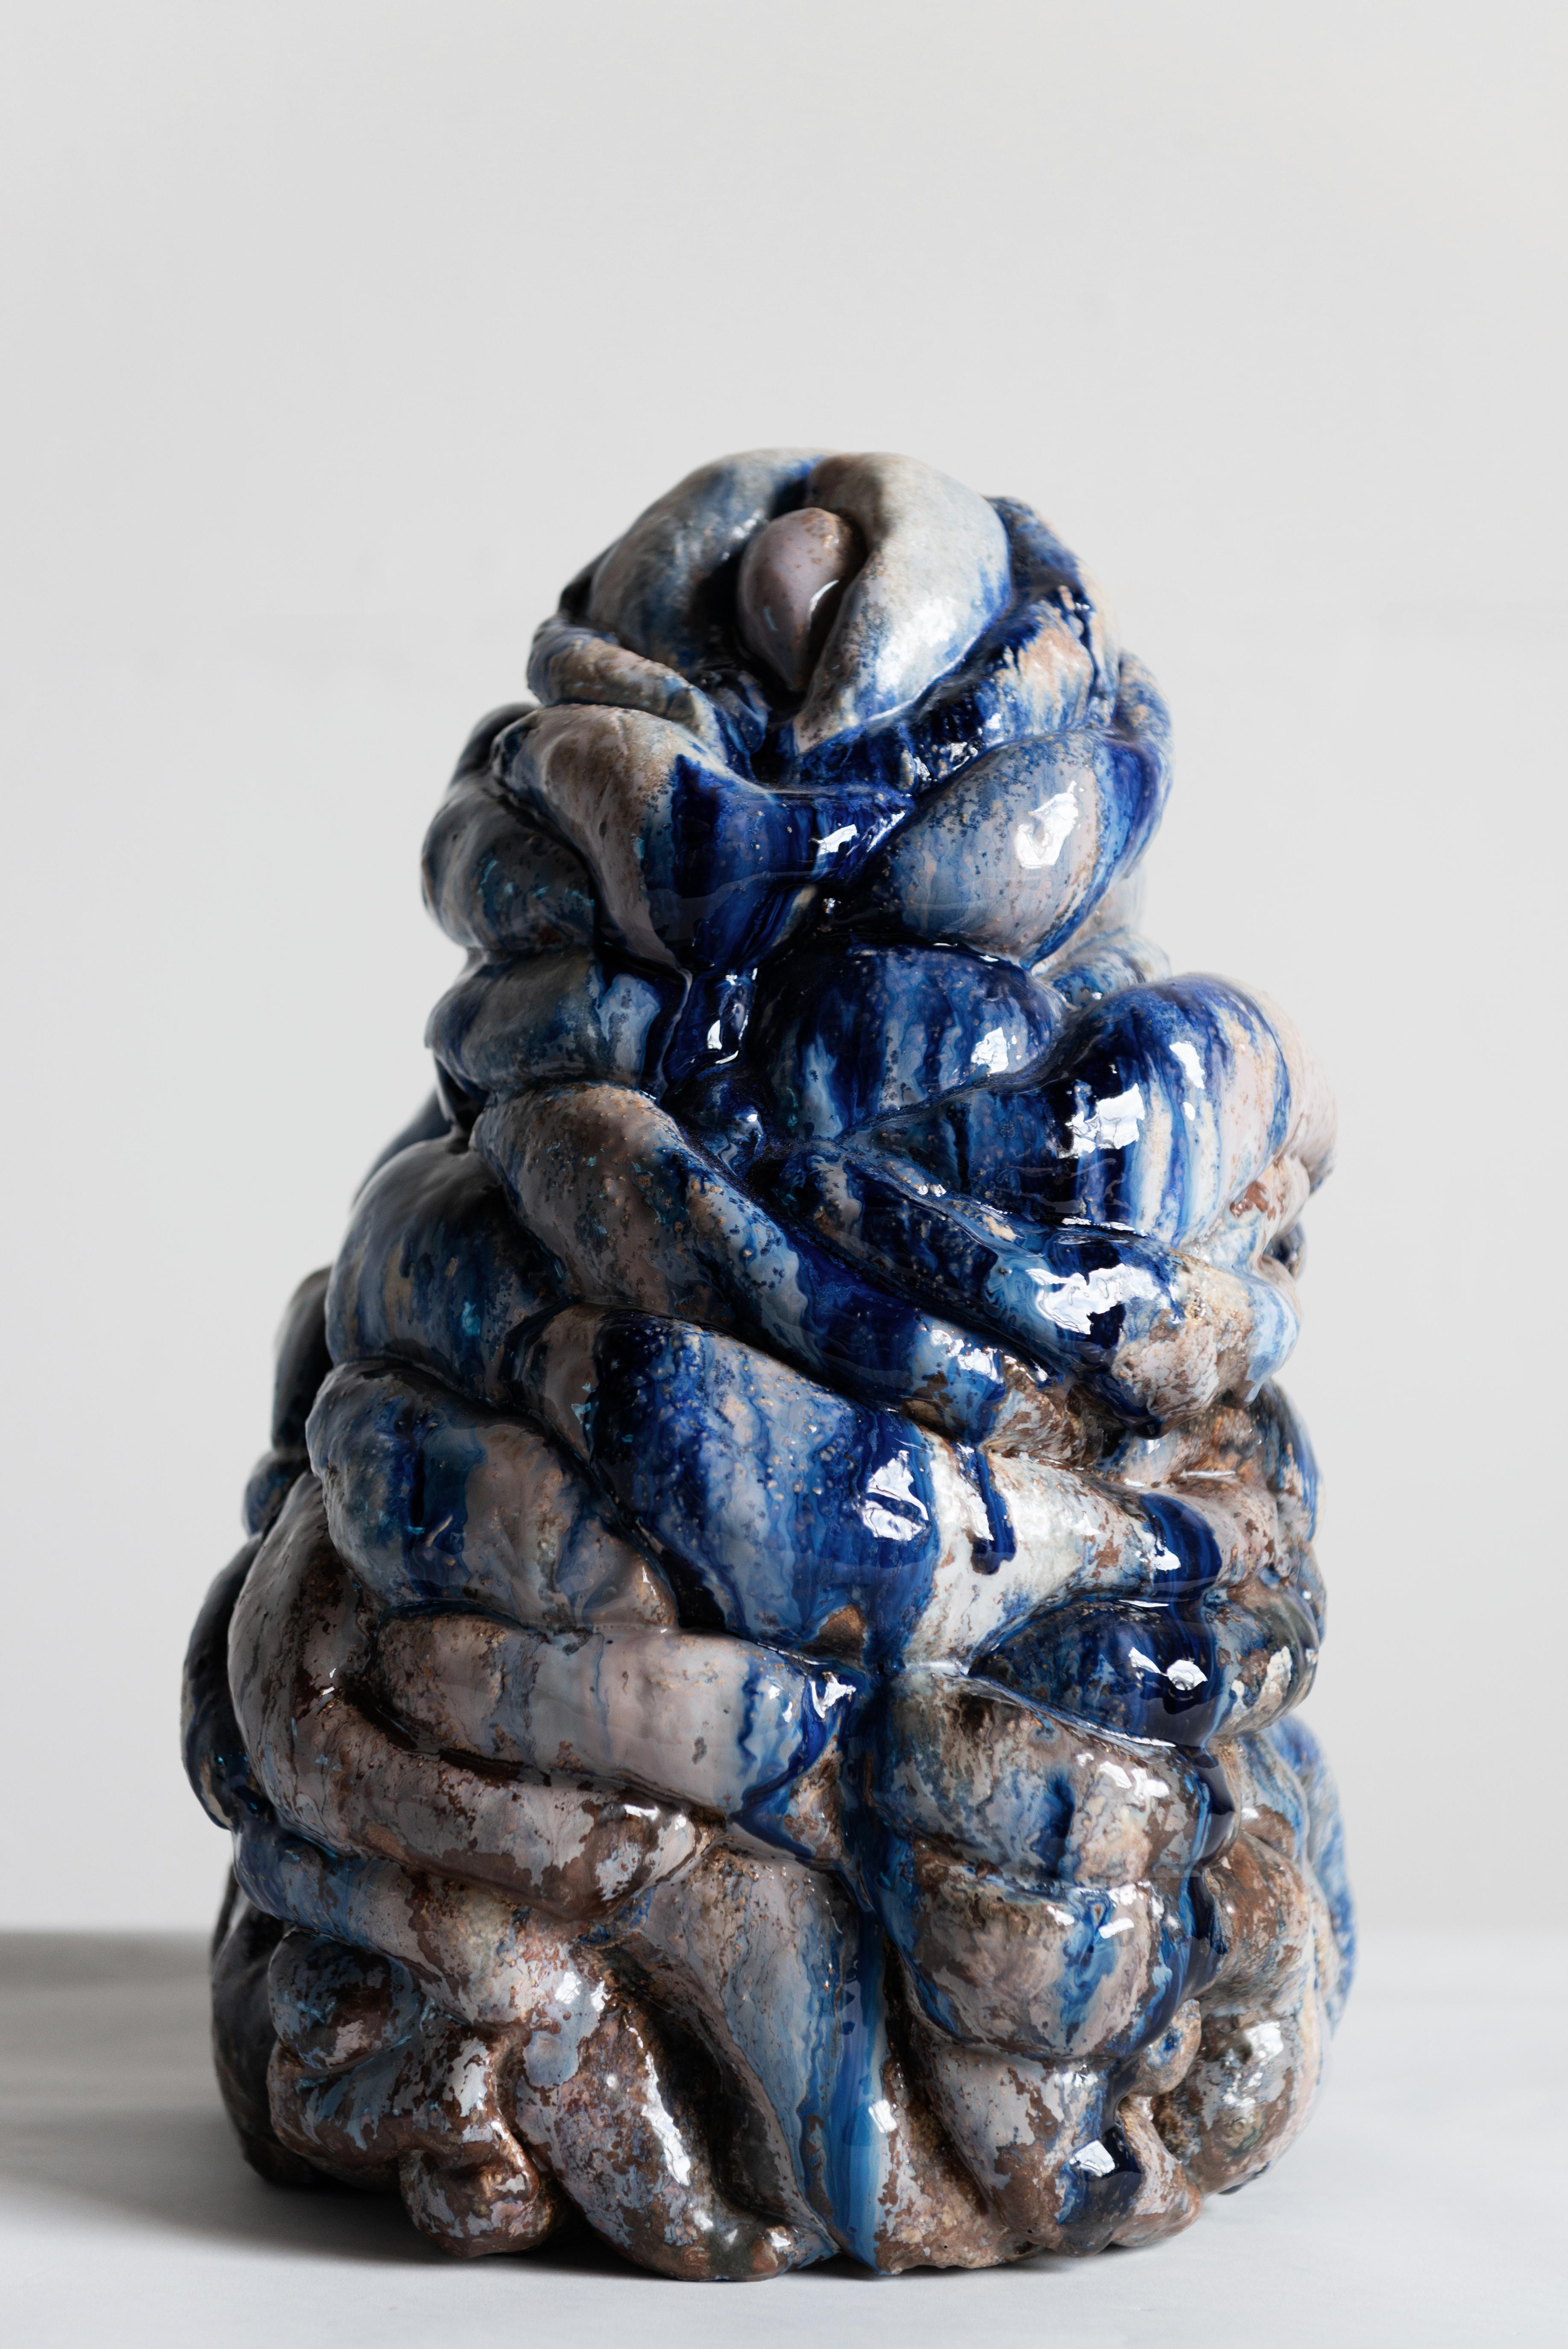 Plastic blue sculpture by Natasja Alers, 2019.
Dimensions: 44 x 28 x 24 cm
Material: Ceramics, glazes.

Visual artist Natasja Alers (The Hague, 1987) graduated from the Gerrit Rietveld Academy in the field of ceramics. Alers makes casts of human